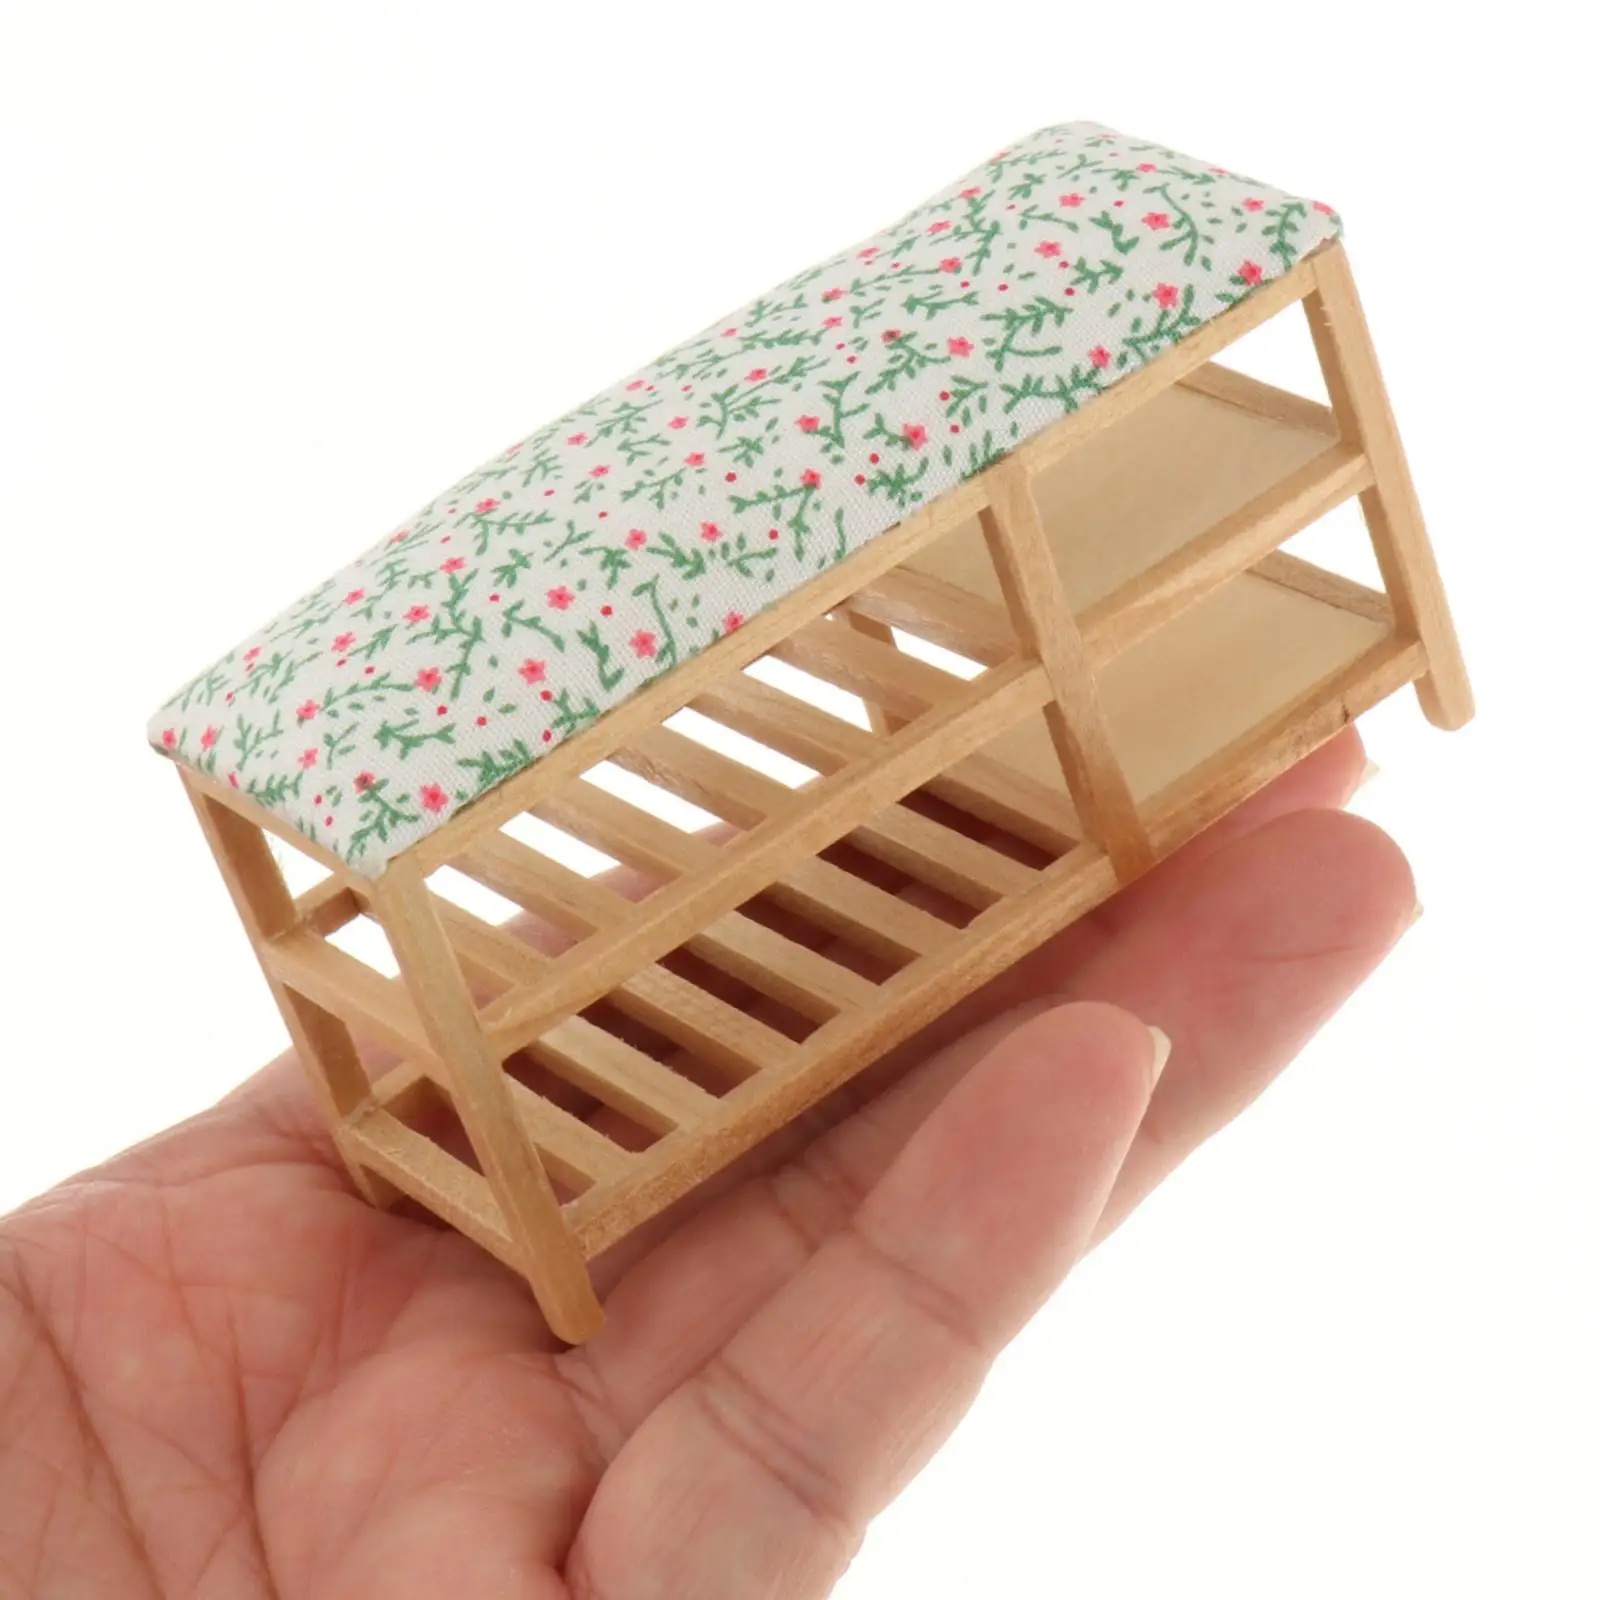 1/12 Dollhouse Miniature Shoe Rack Bench Furniture Scenery Supplies Doll Accessories Decoration for Home Living Room Bedroom